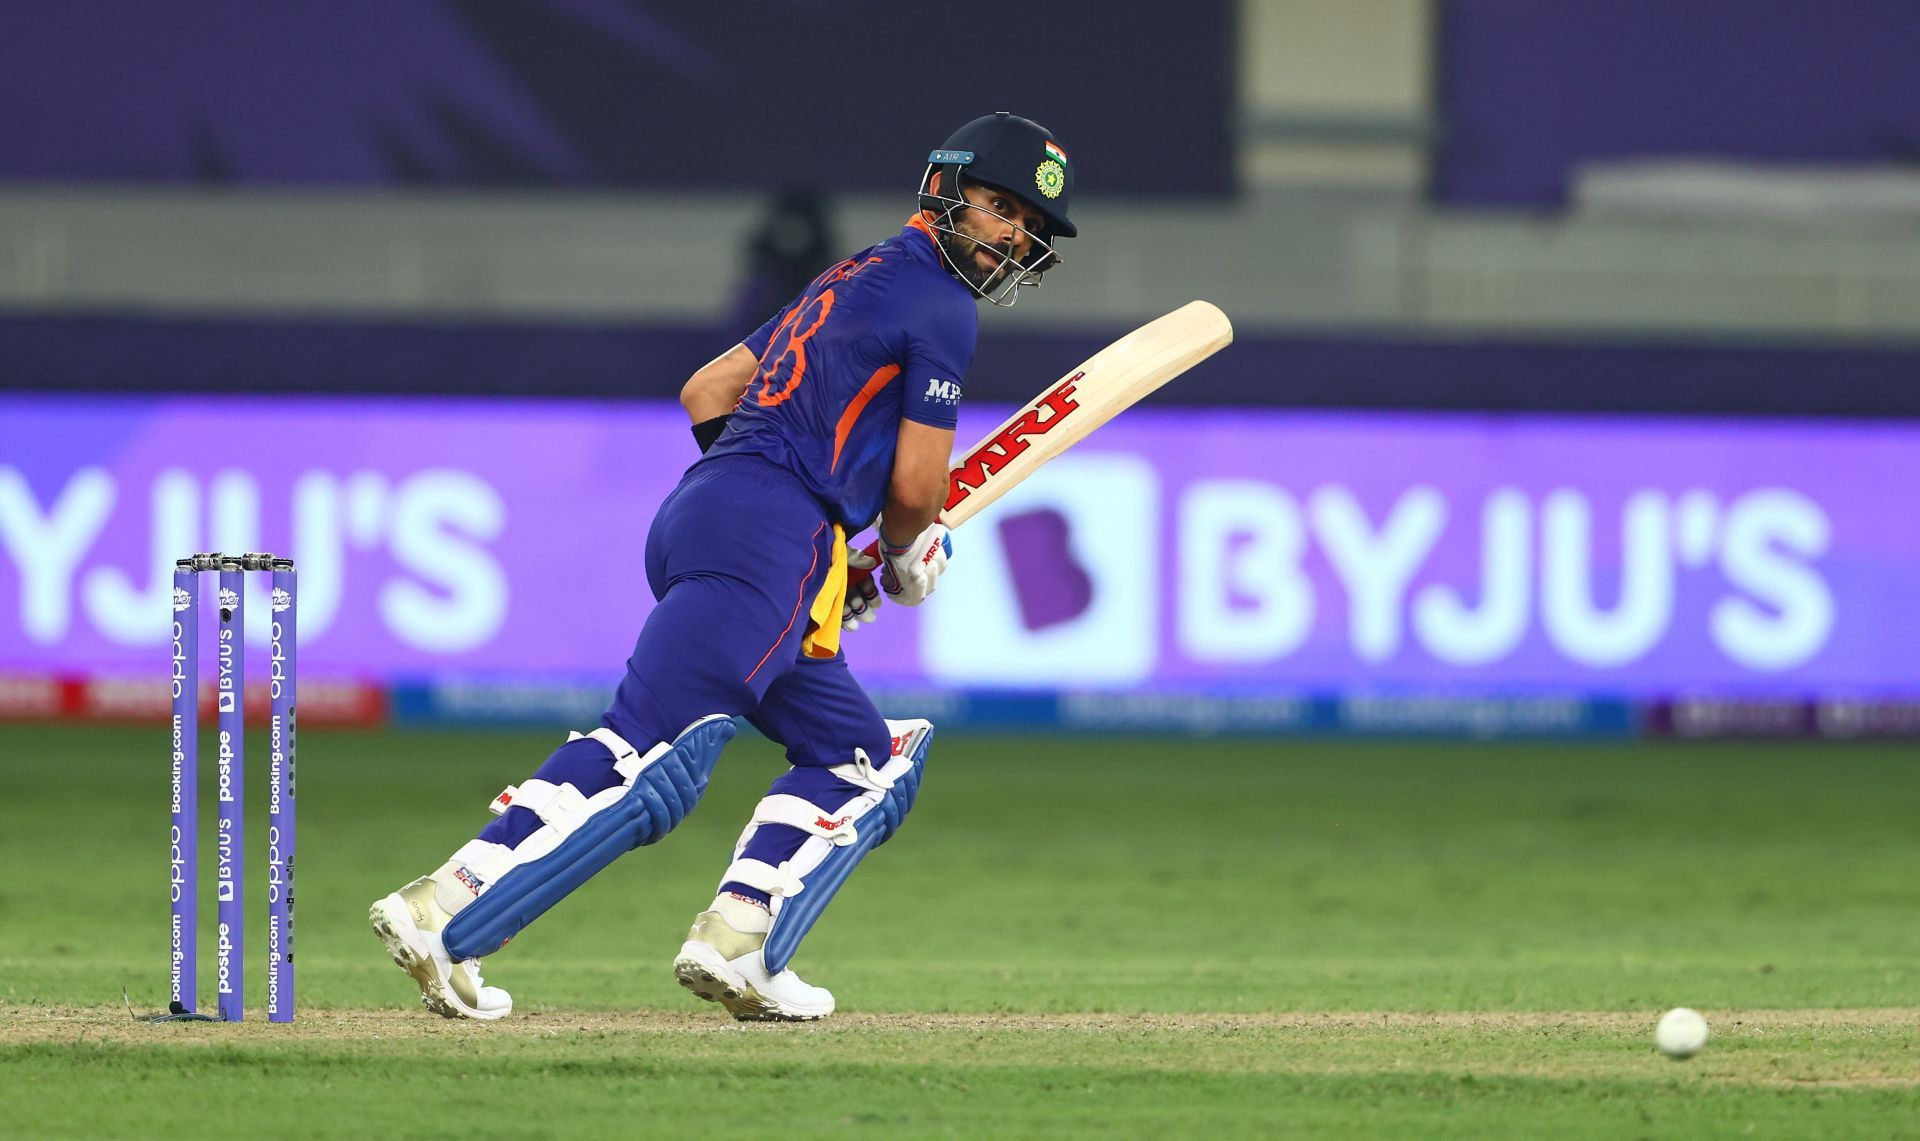 Virat Kohli averages more than 50 in all three formats of the game